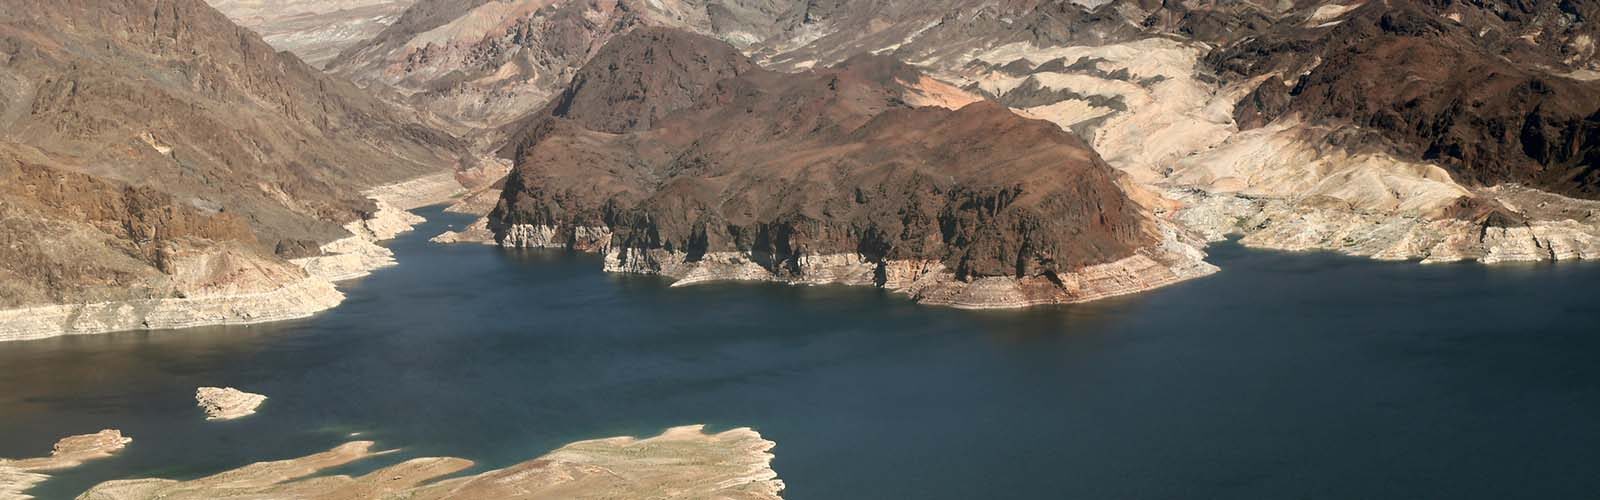 Aerial view of the Lake Mead Reservoir showing signs of drought